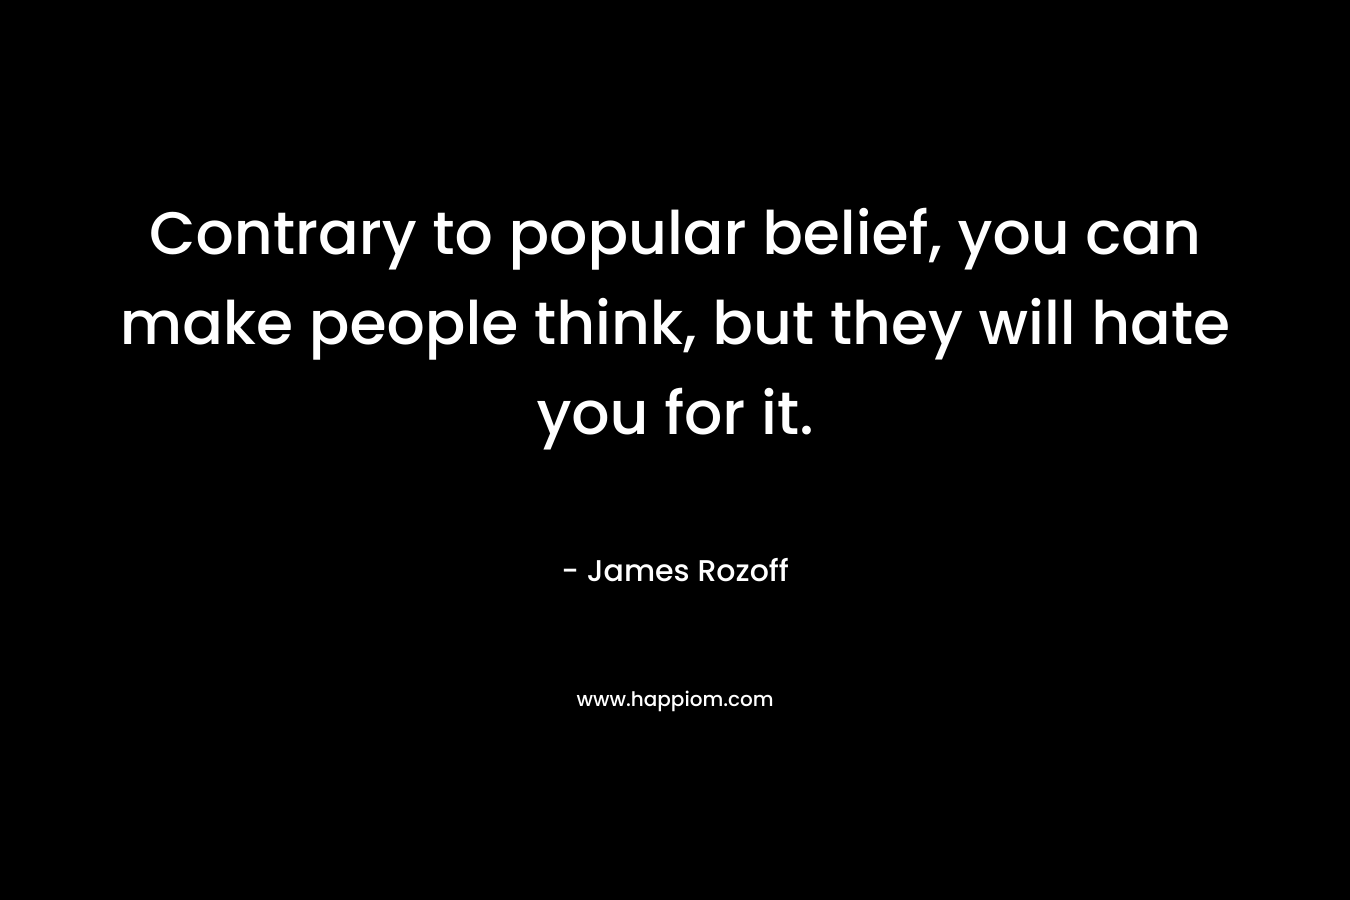 Contrary to popular belief, you can make people think, but they will hate you for it.